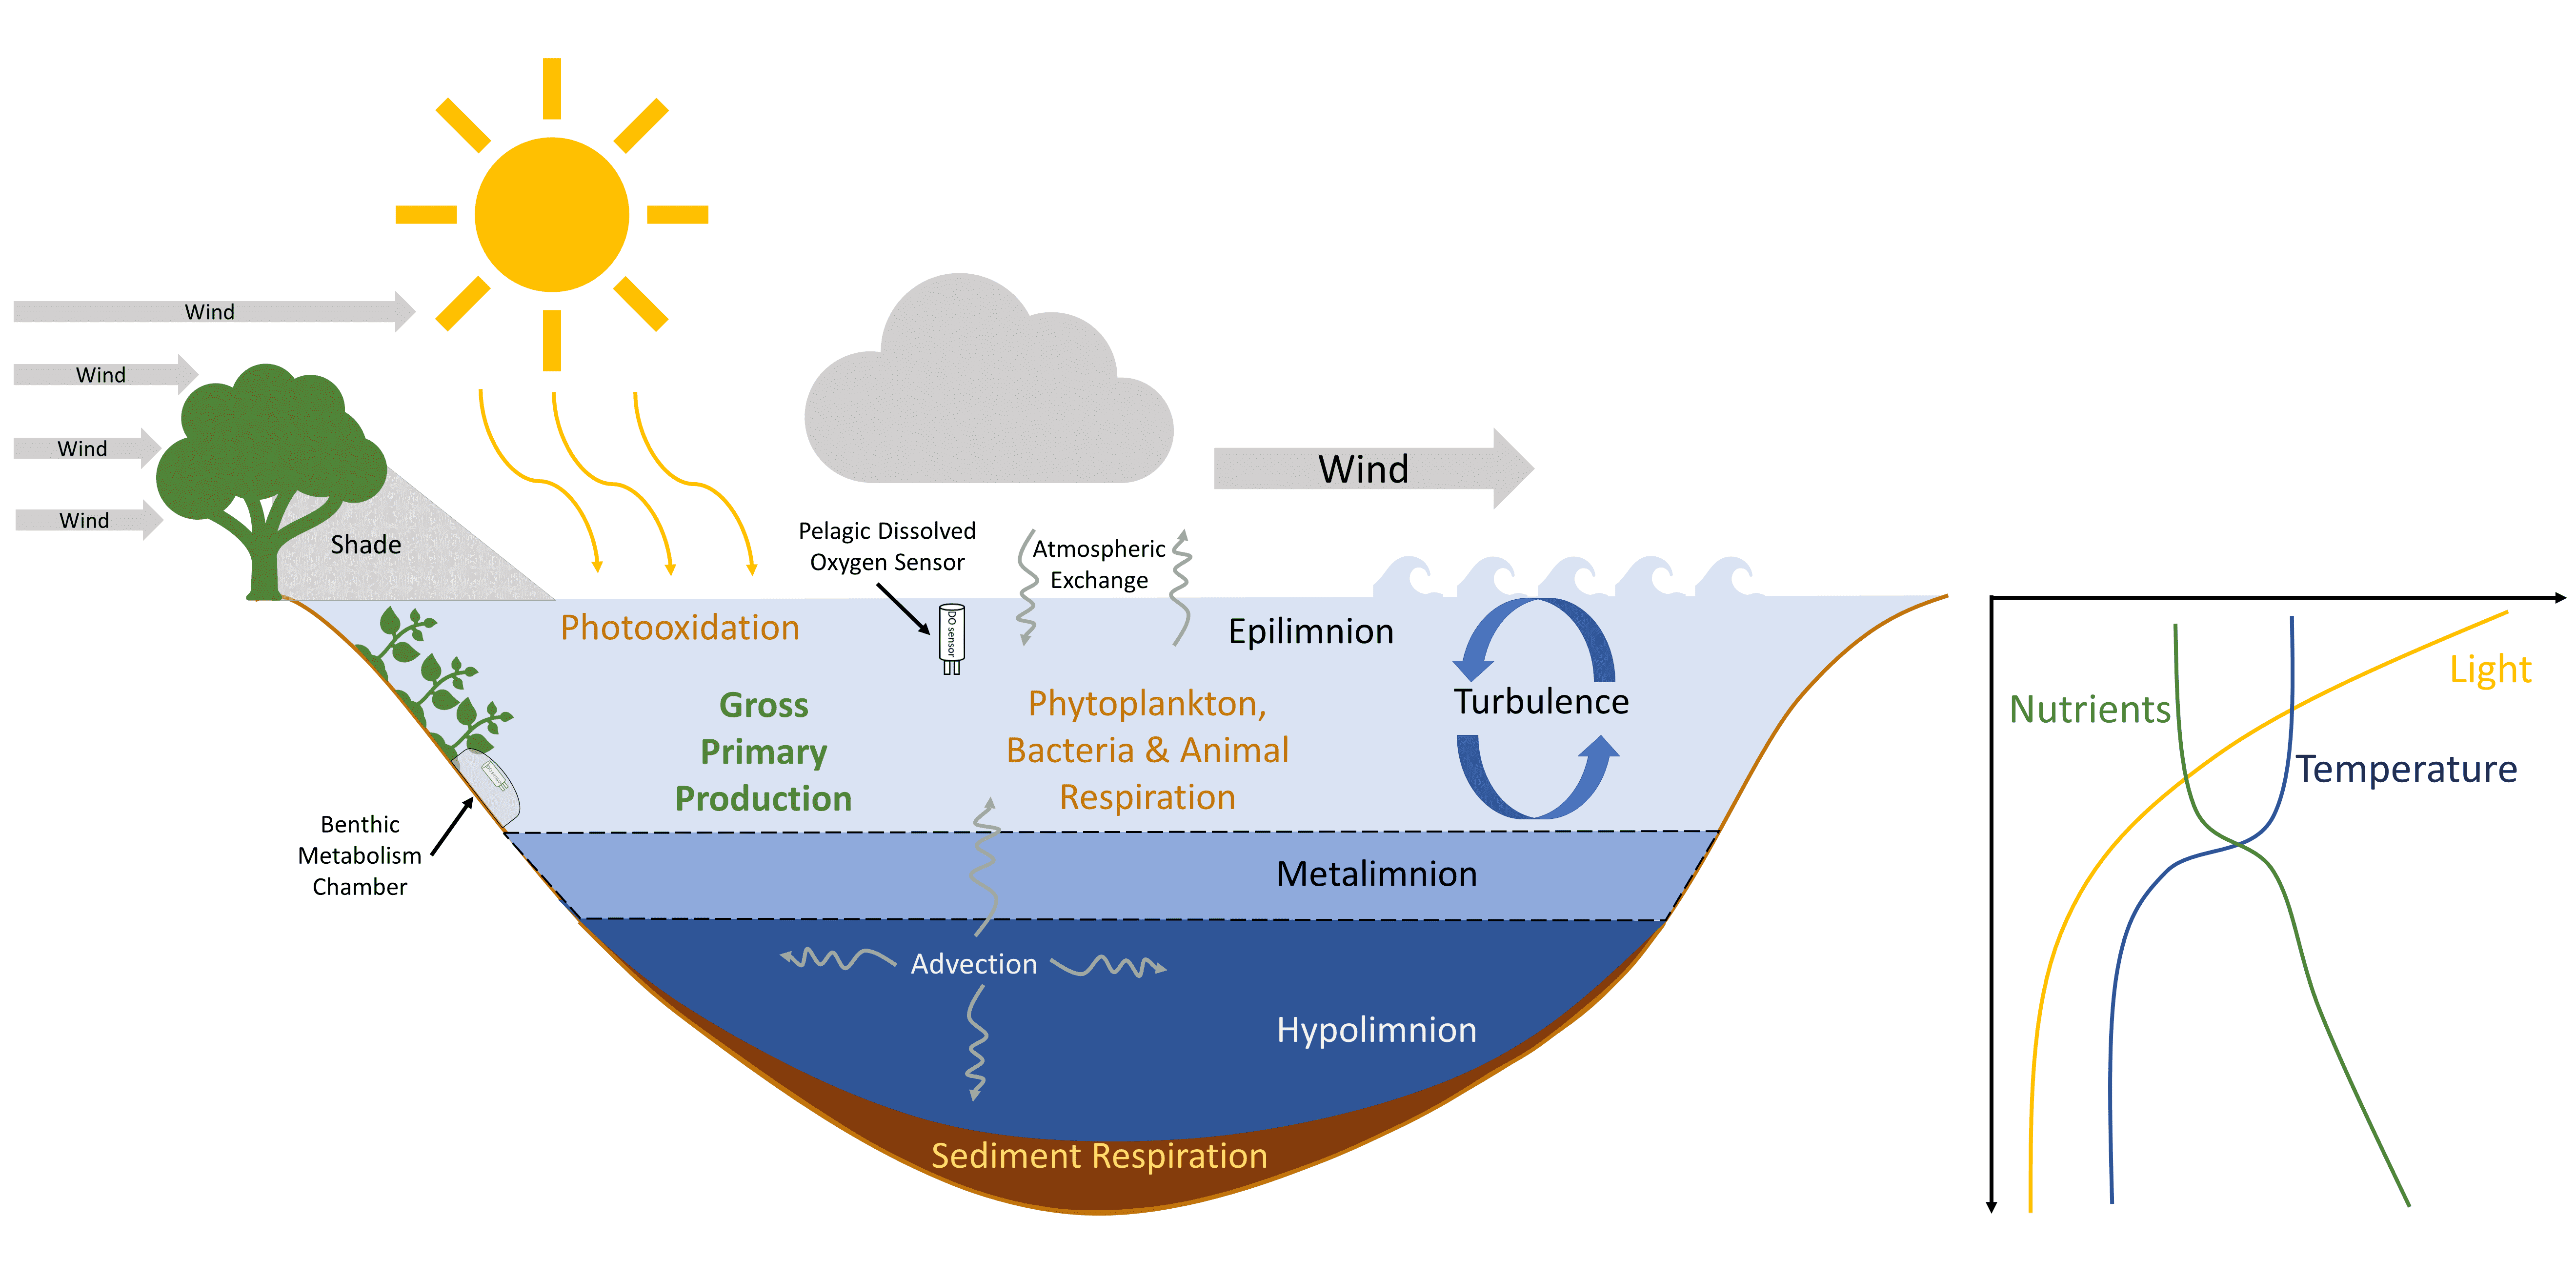 Lake cross-sectional diagram of the factors influencing lake metabolic rates and concentration of dissolved gases within lakes